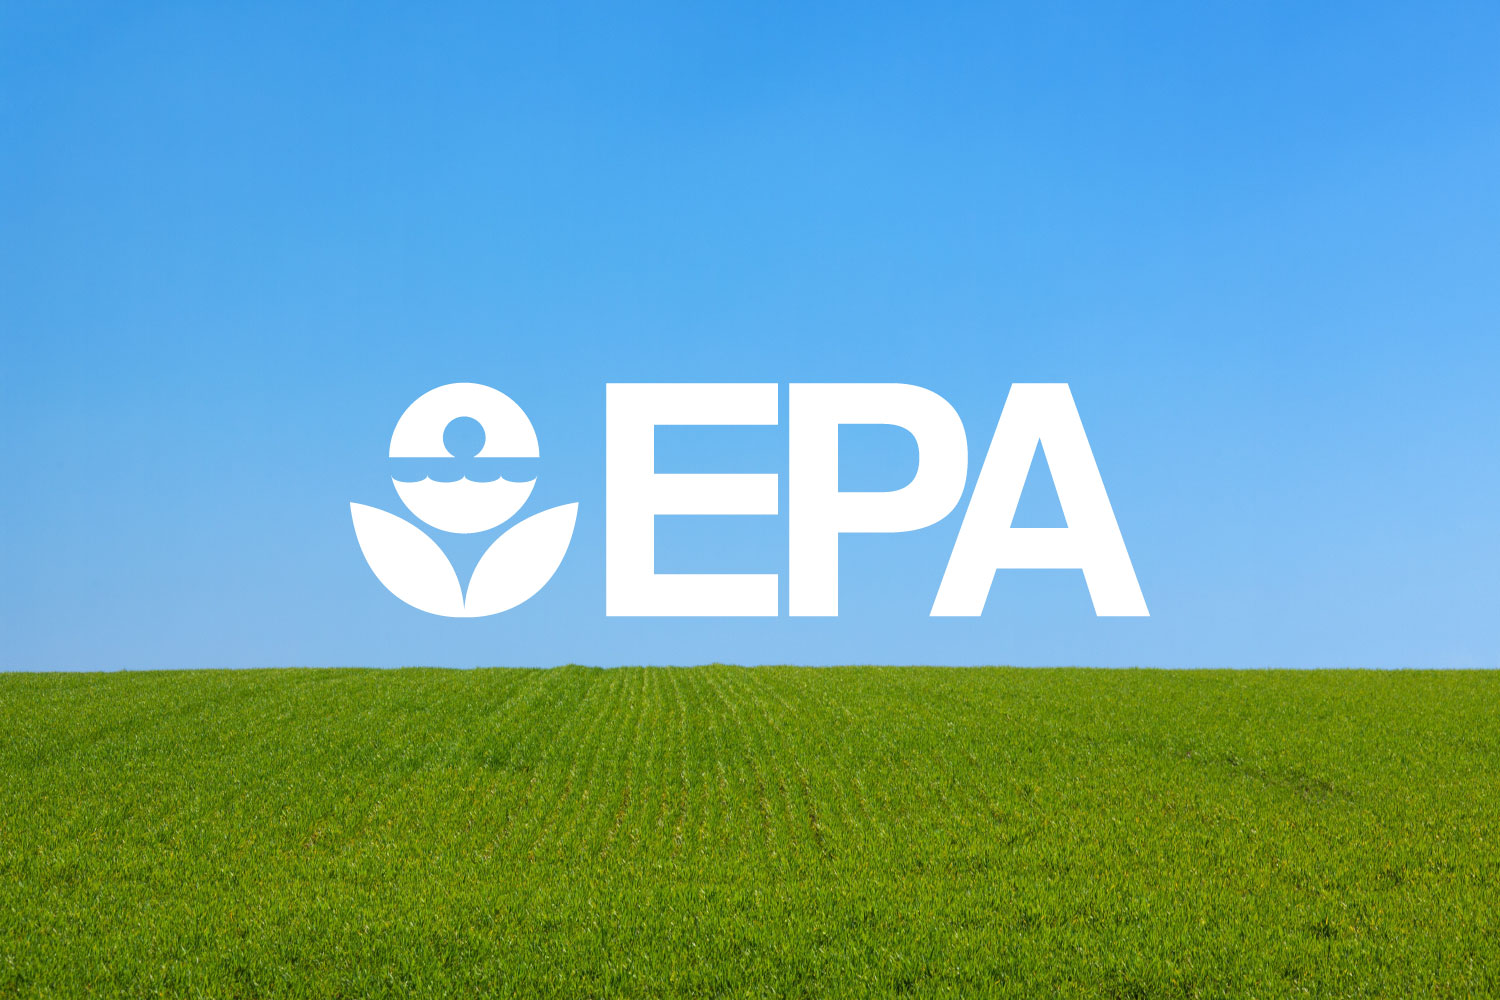 EPA Announces August 31 Termination of Temporary Enforcement Discretion Policy Established for COVID-19 Pandemic